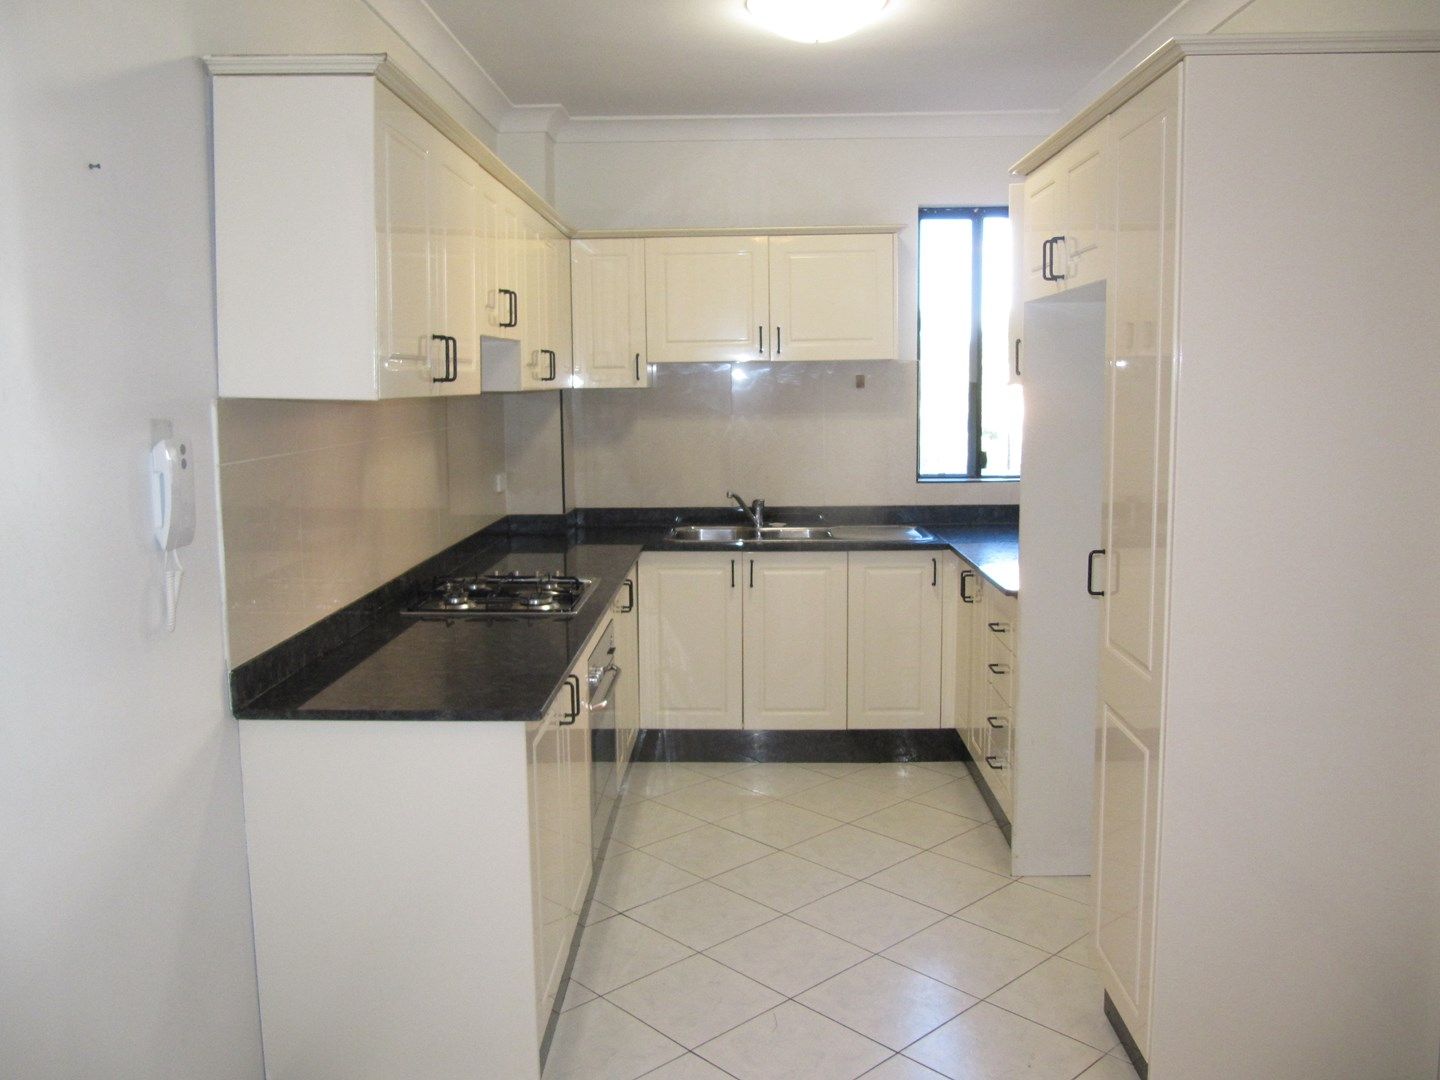 2 bedrooms Apartment / Unit / Flat in 3/26-28 Melvin Street BEVERLY HILLS NSW, 2209